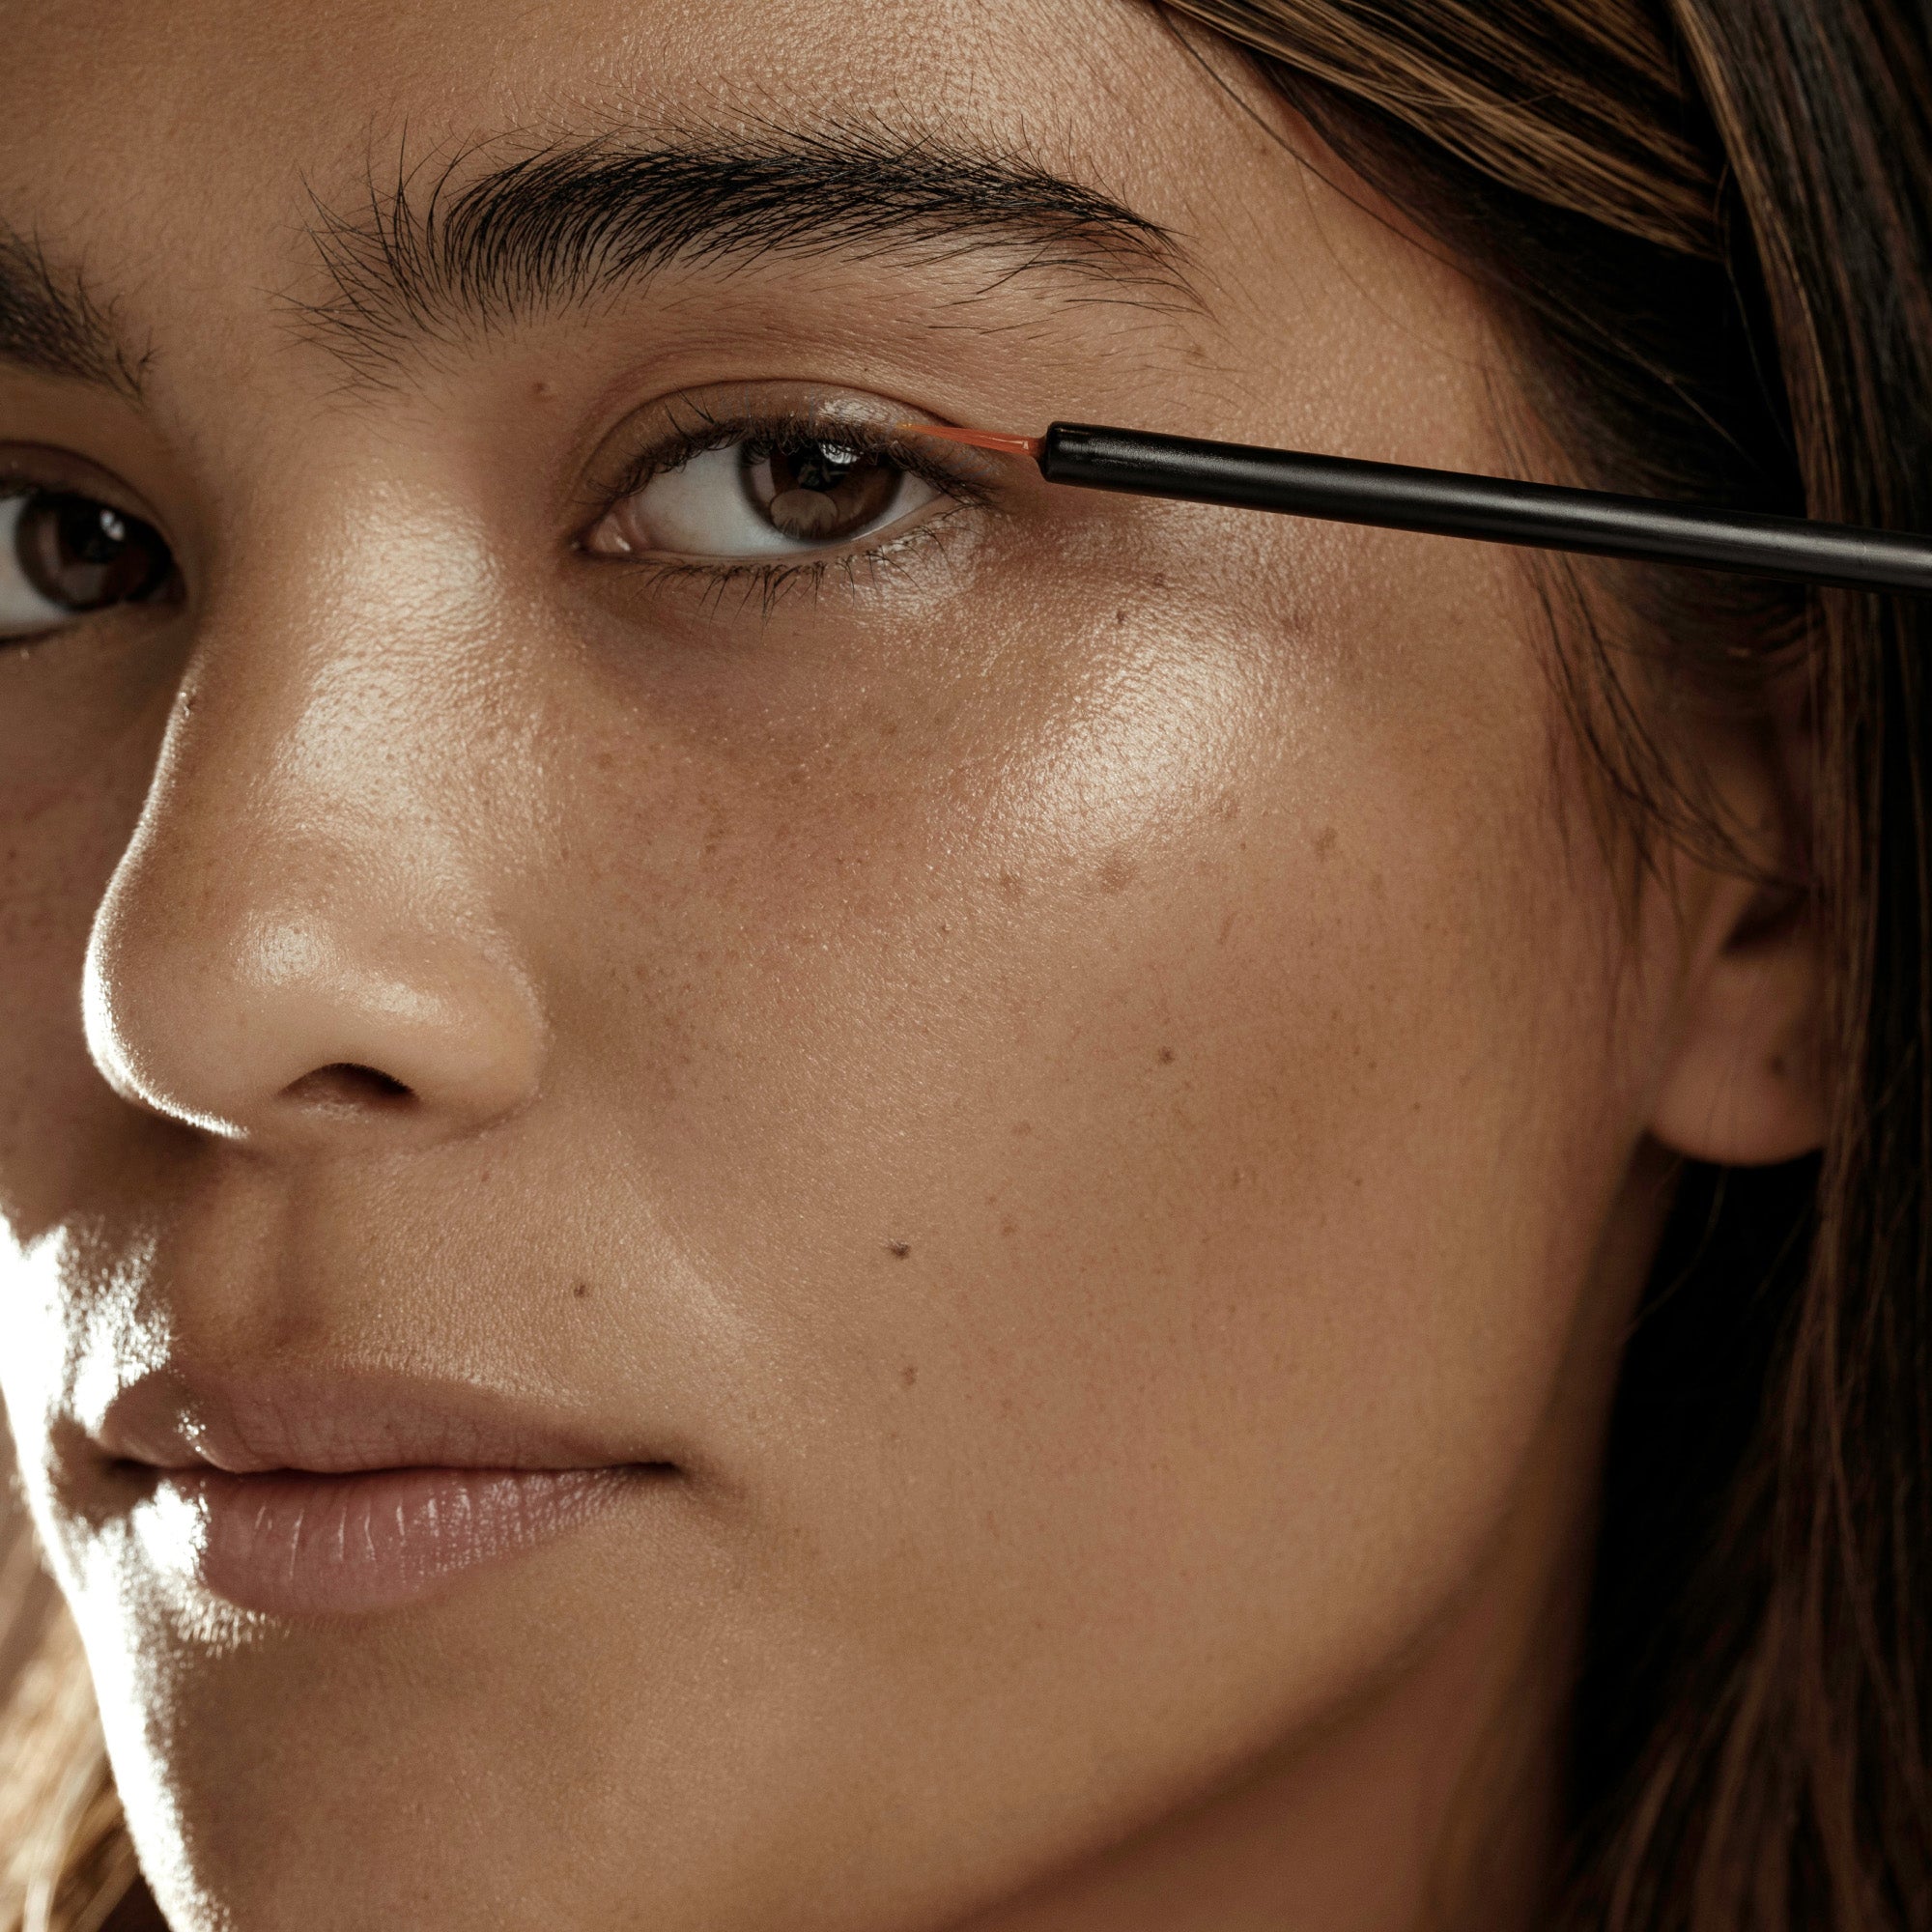 a woman applying makeup with a pencil on her eyebrow